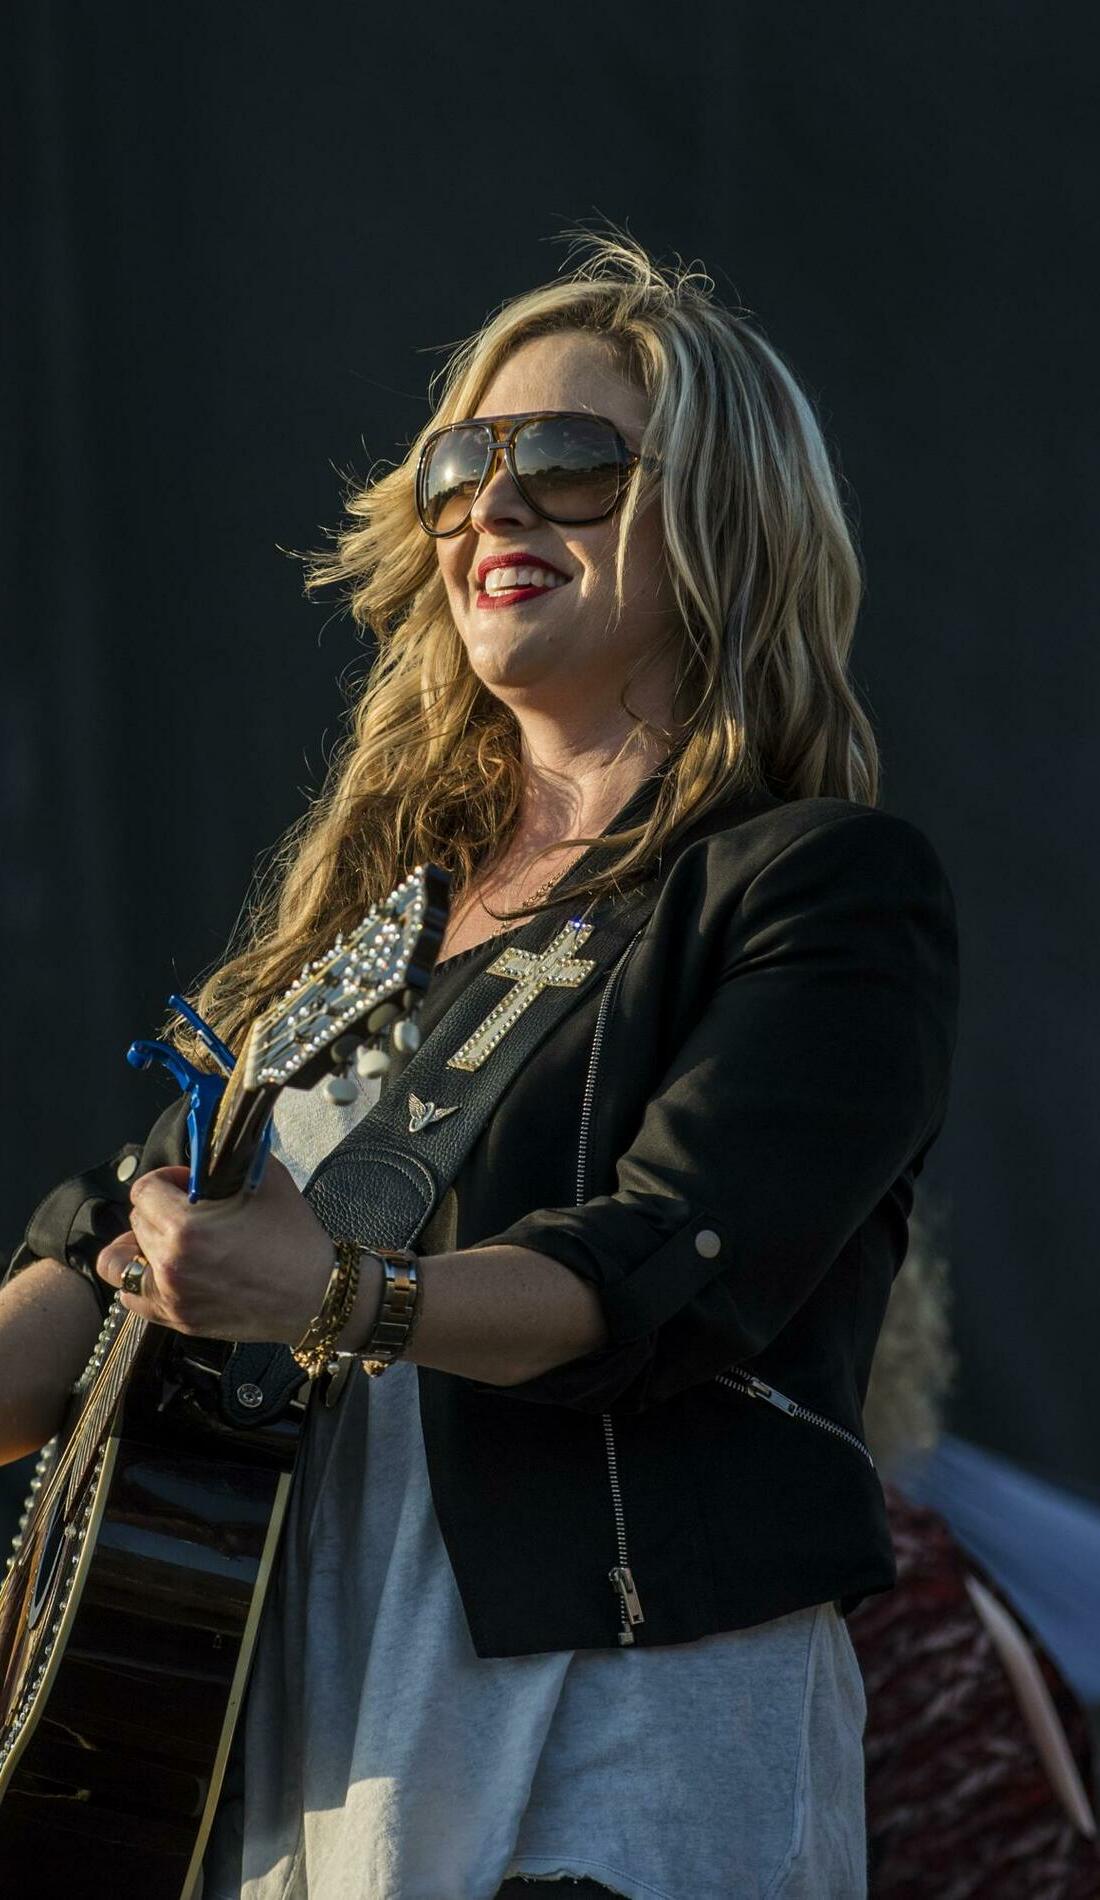 A Sunny Sweeney live event